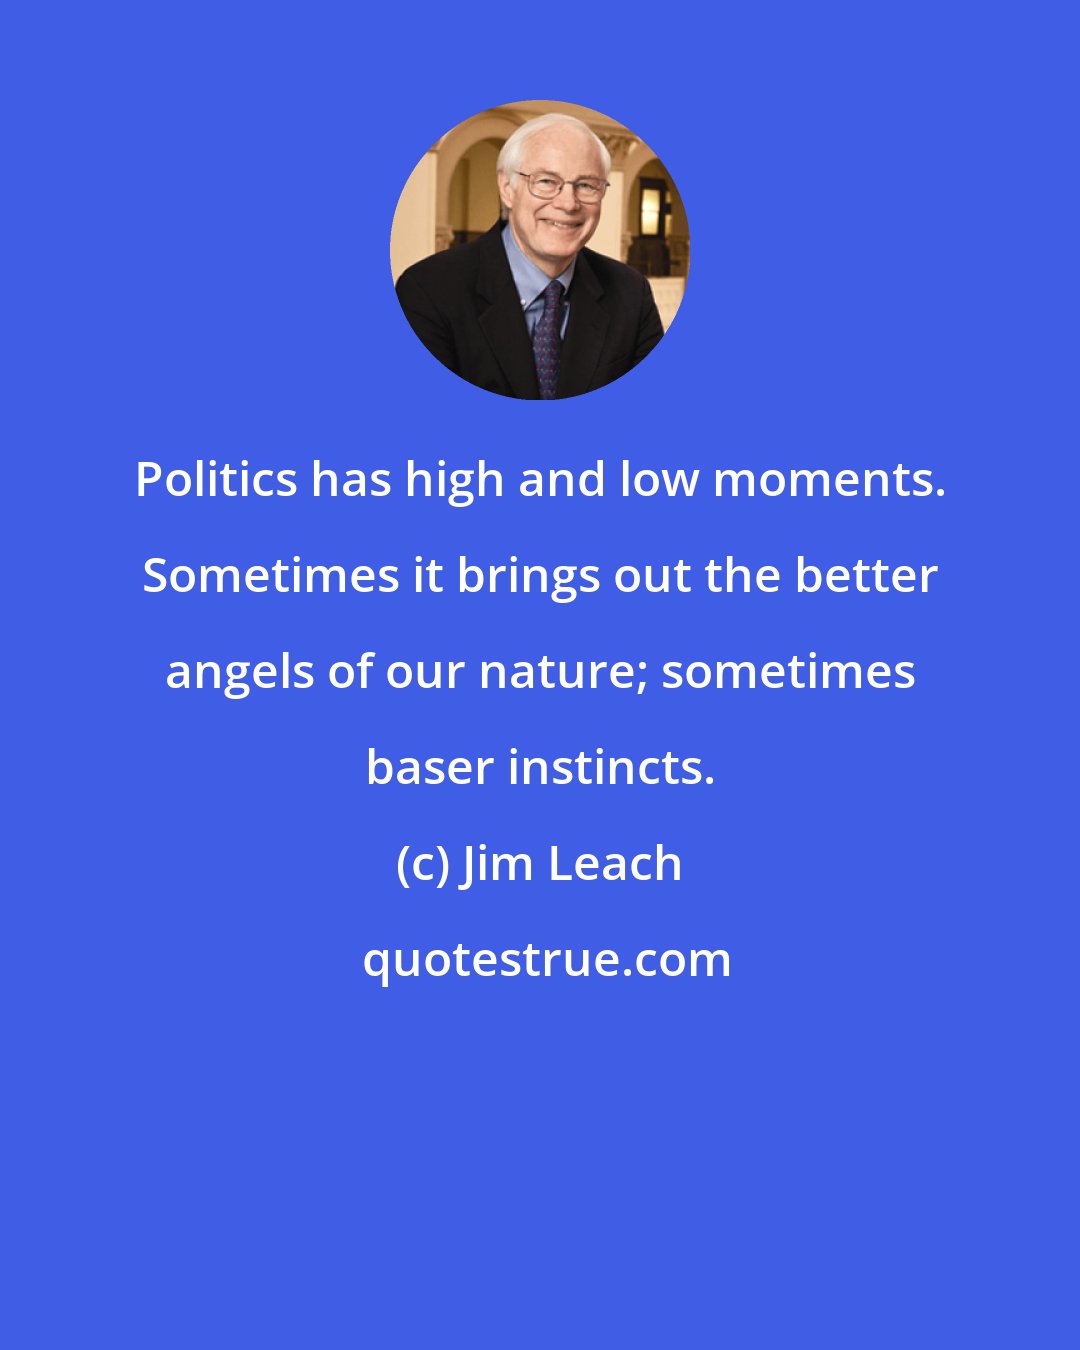 Jim Leach: Politics has high and low moments. Sometimes it brings out the better angels of our nature; sometimes baser instincts.